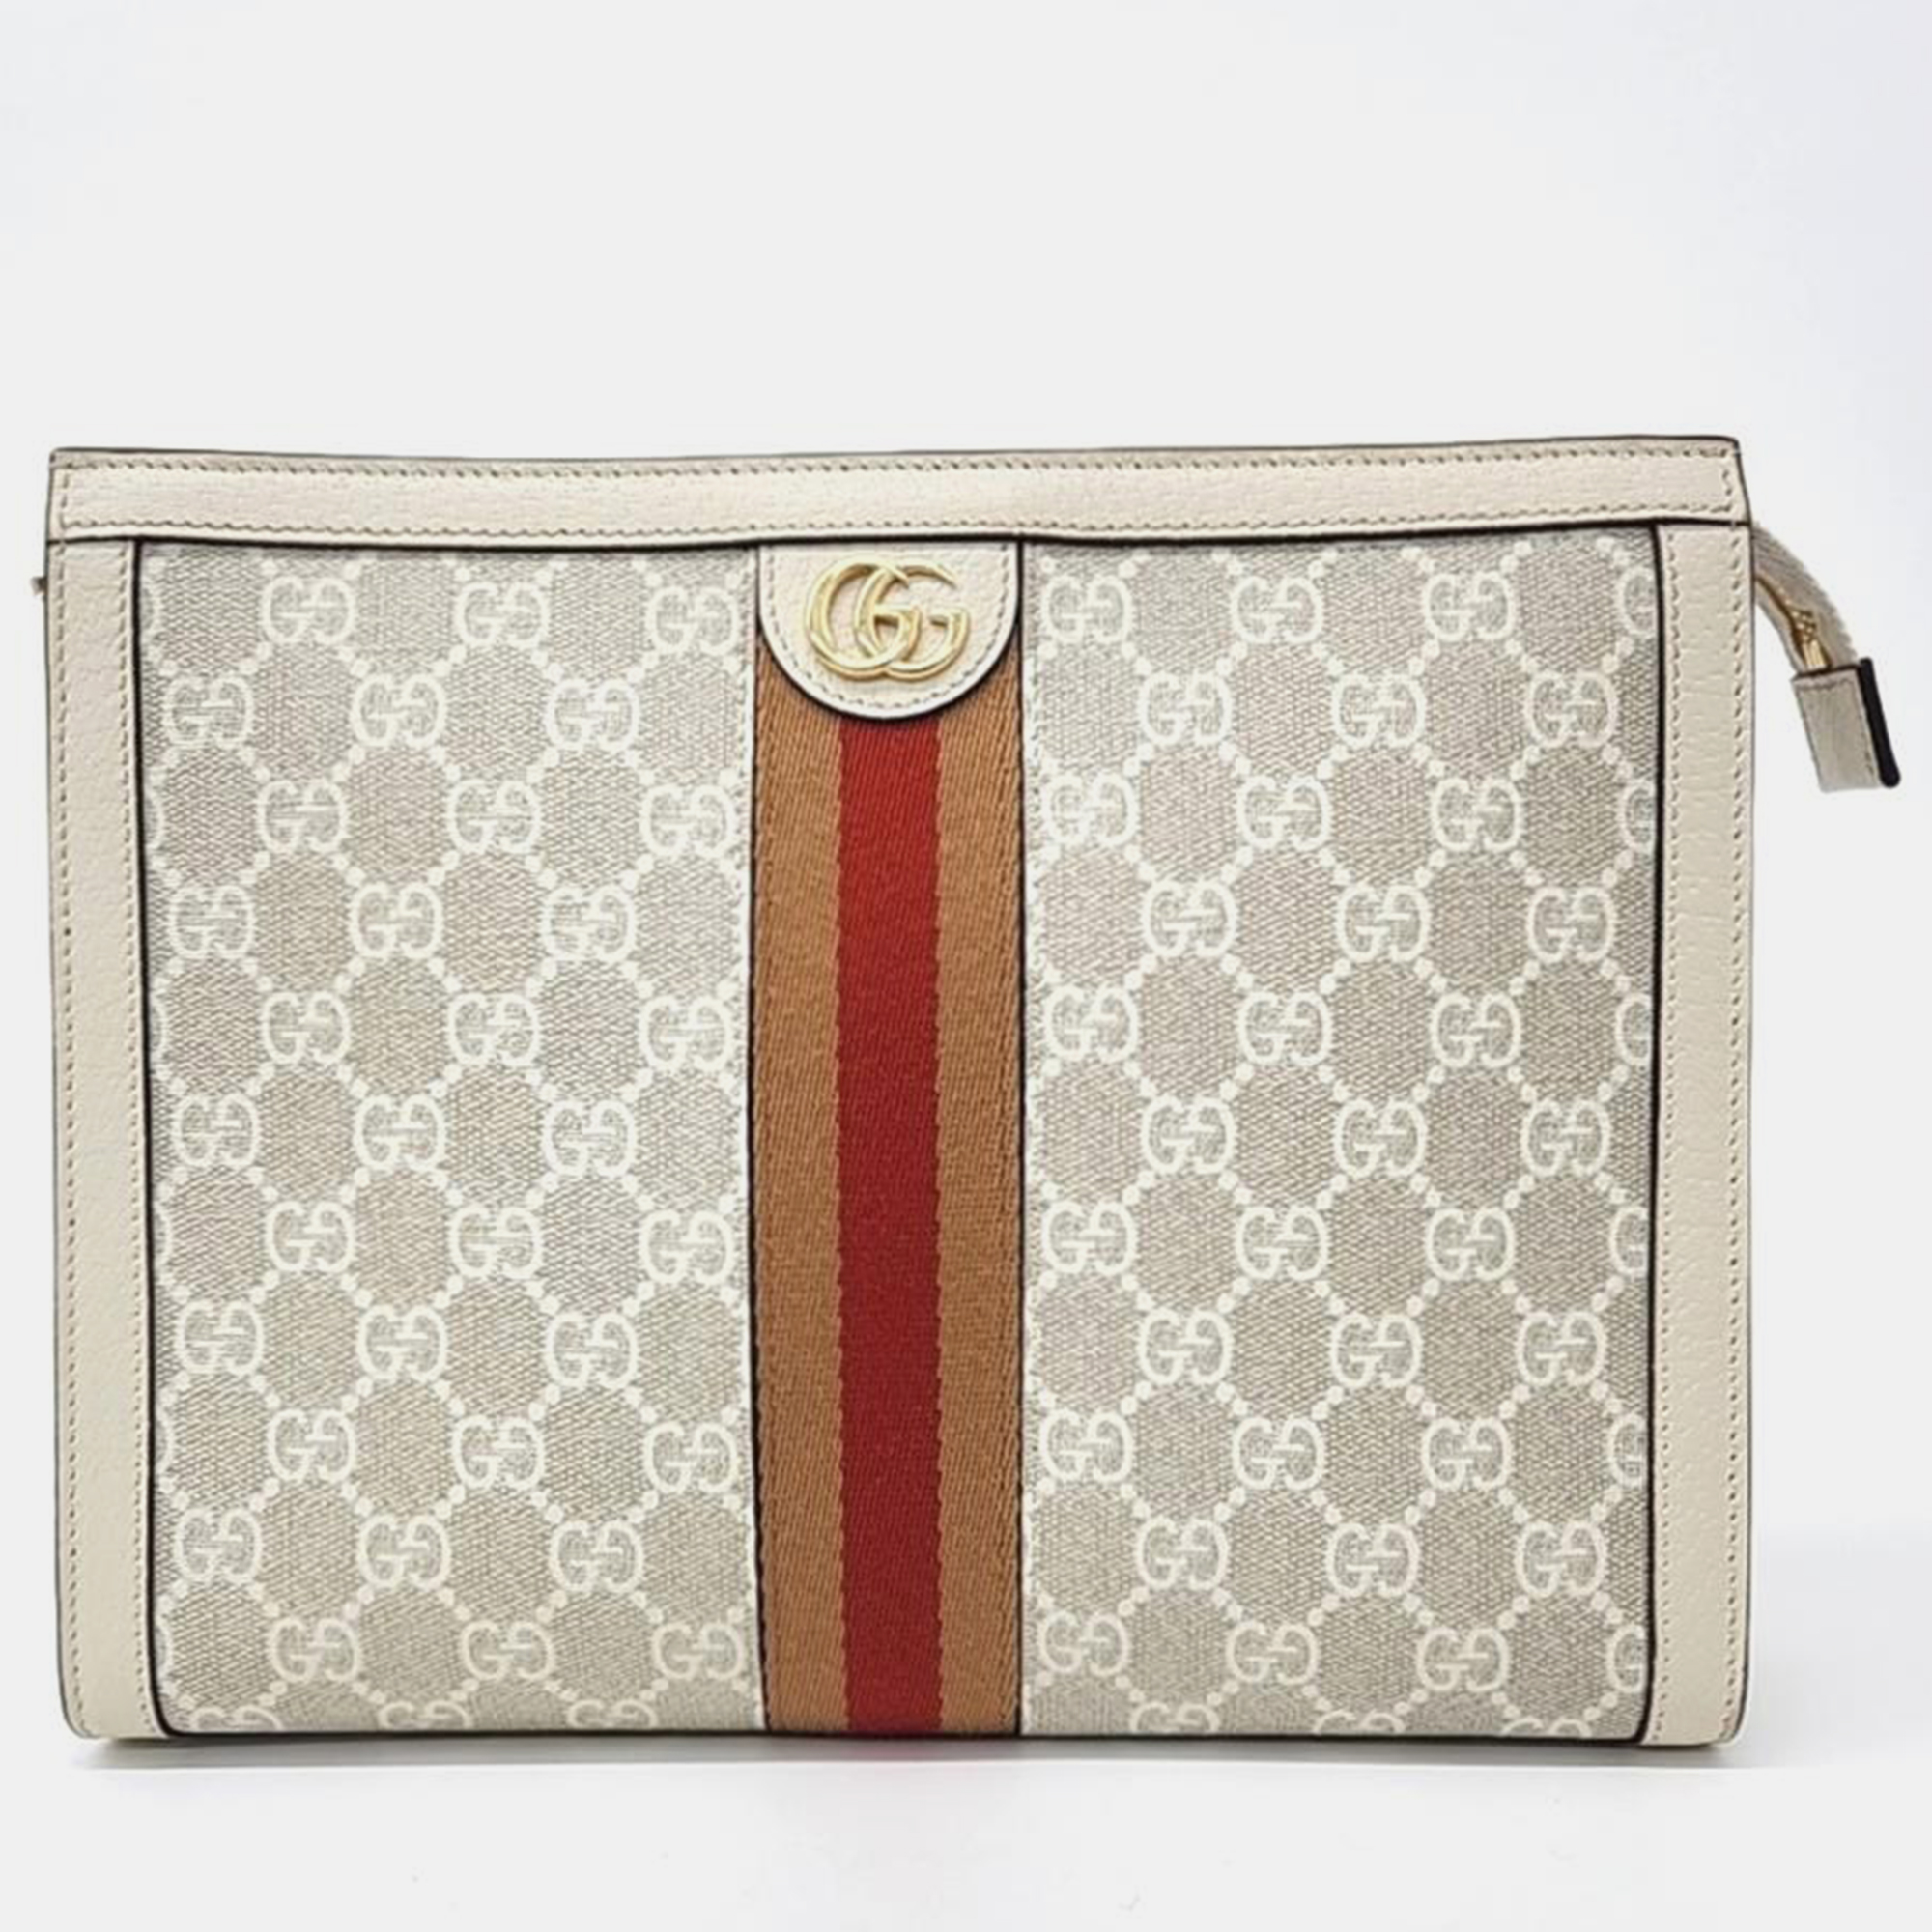 Gucci White leather Ophidia Clutch